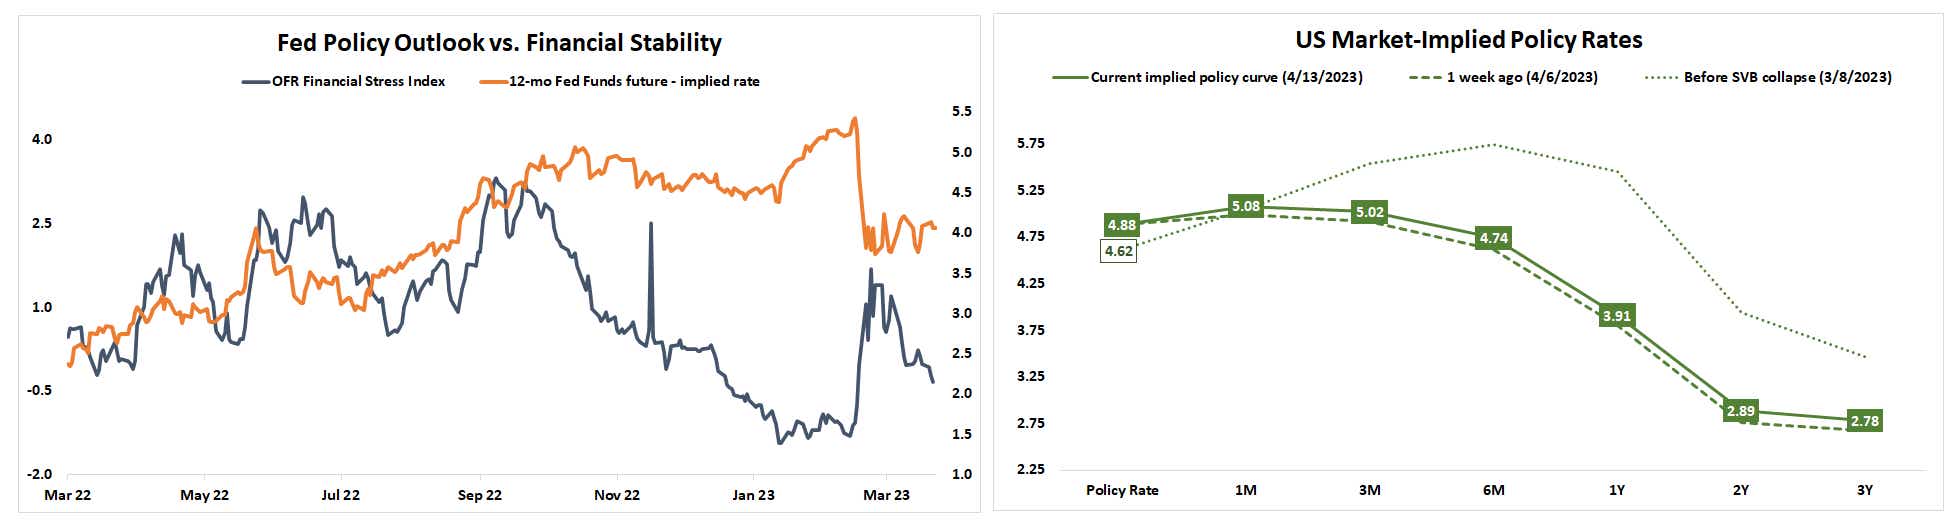 fed policy outlook us market implied policy rates